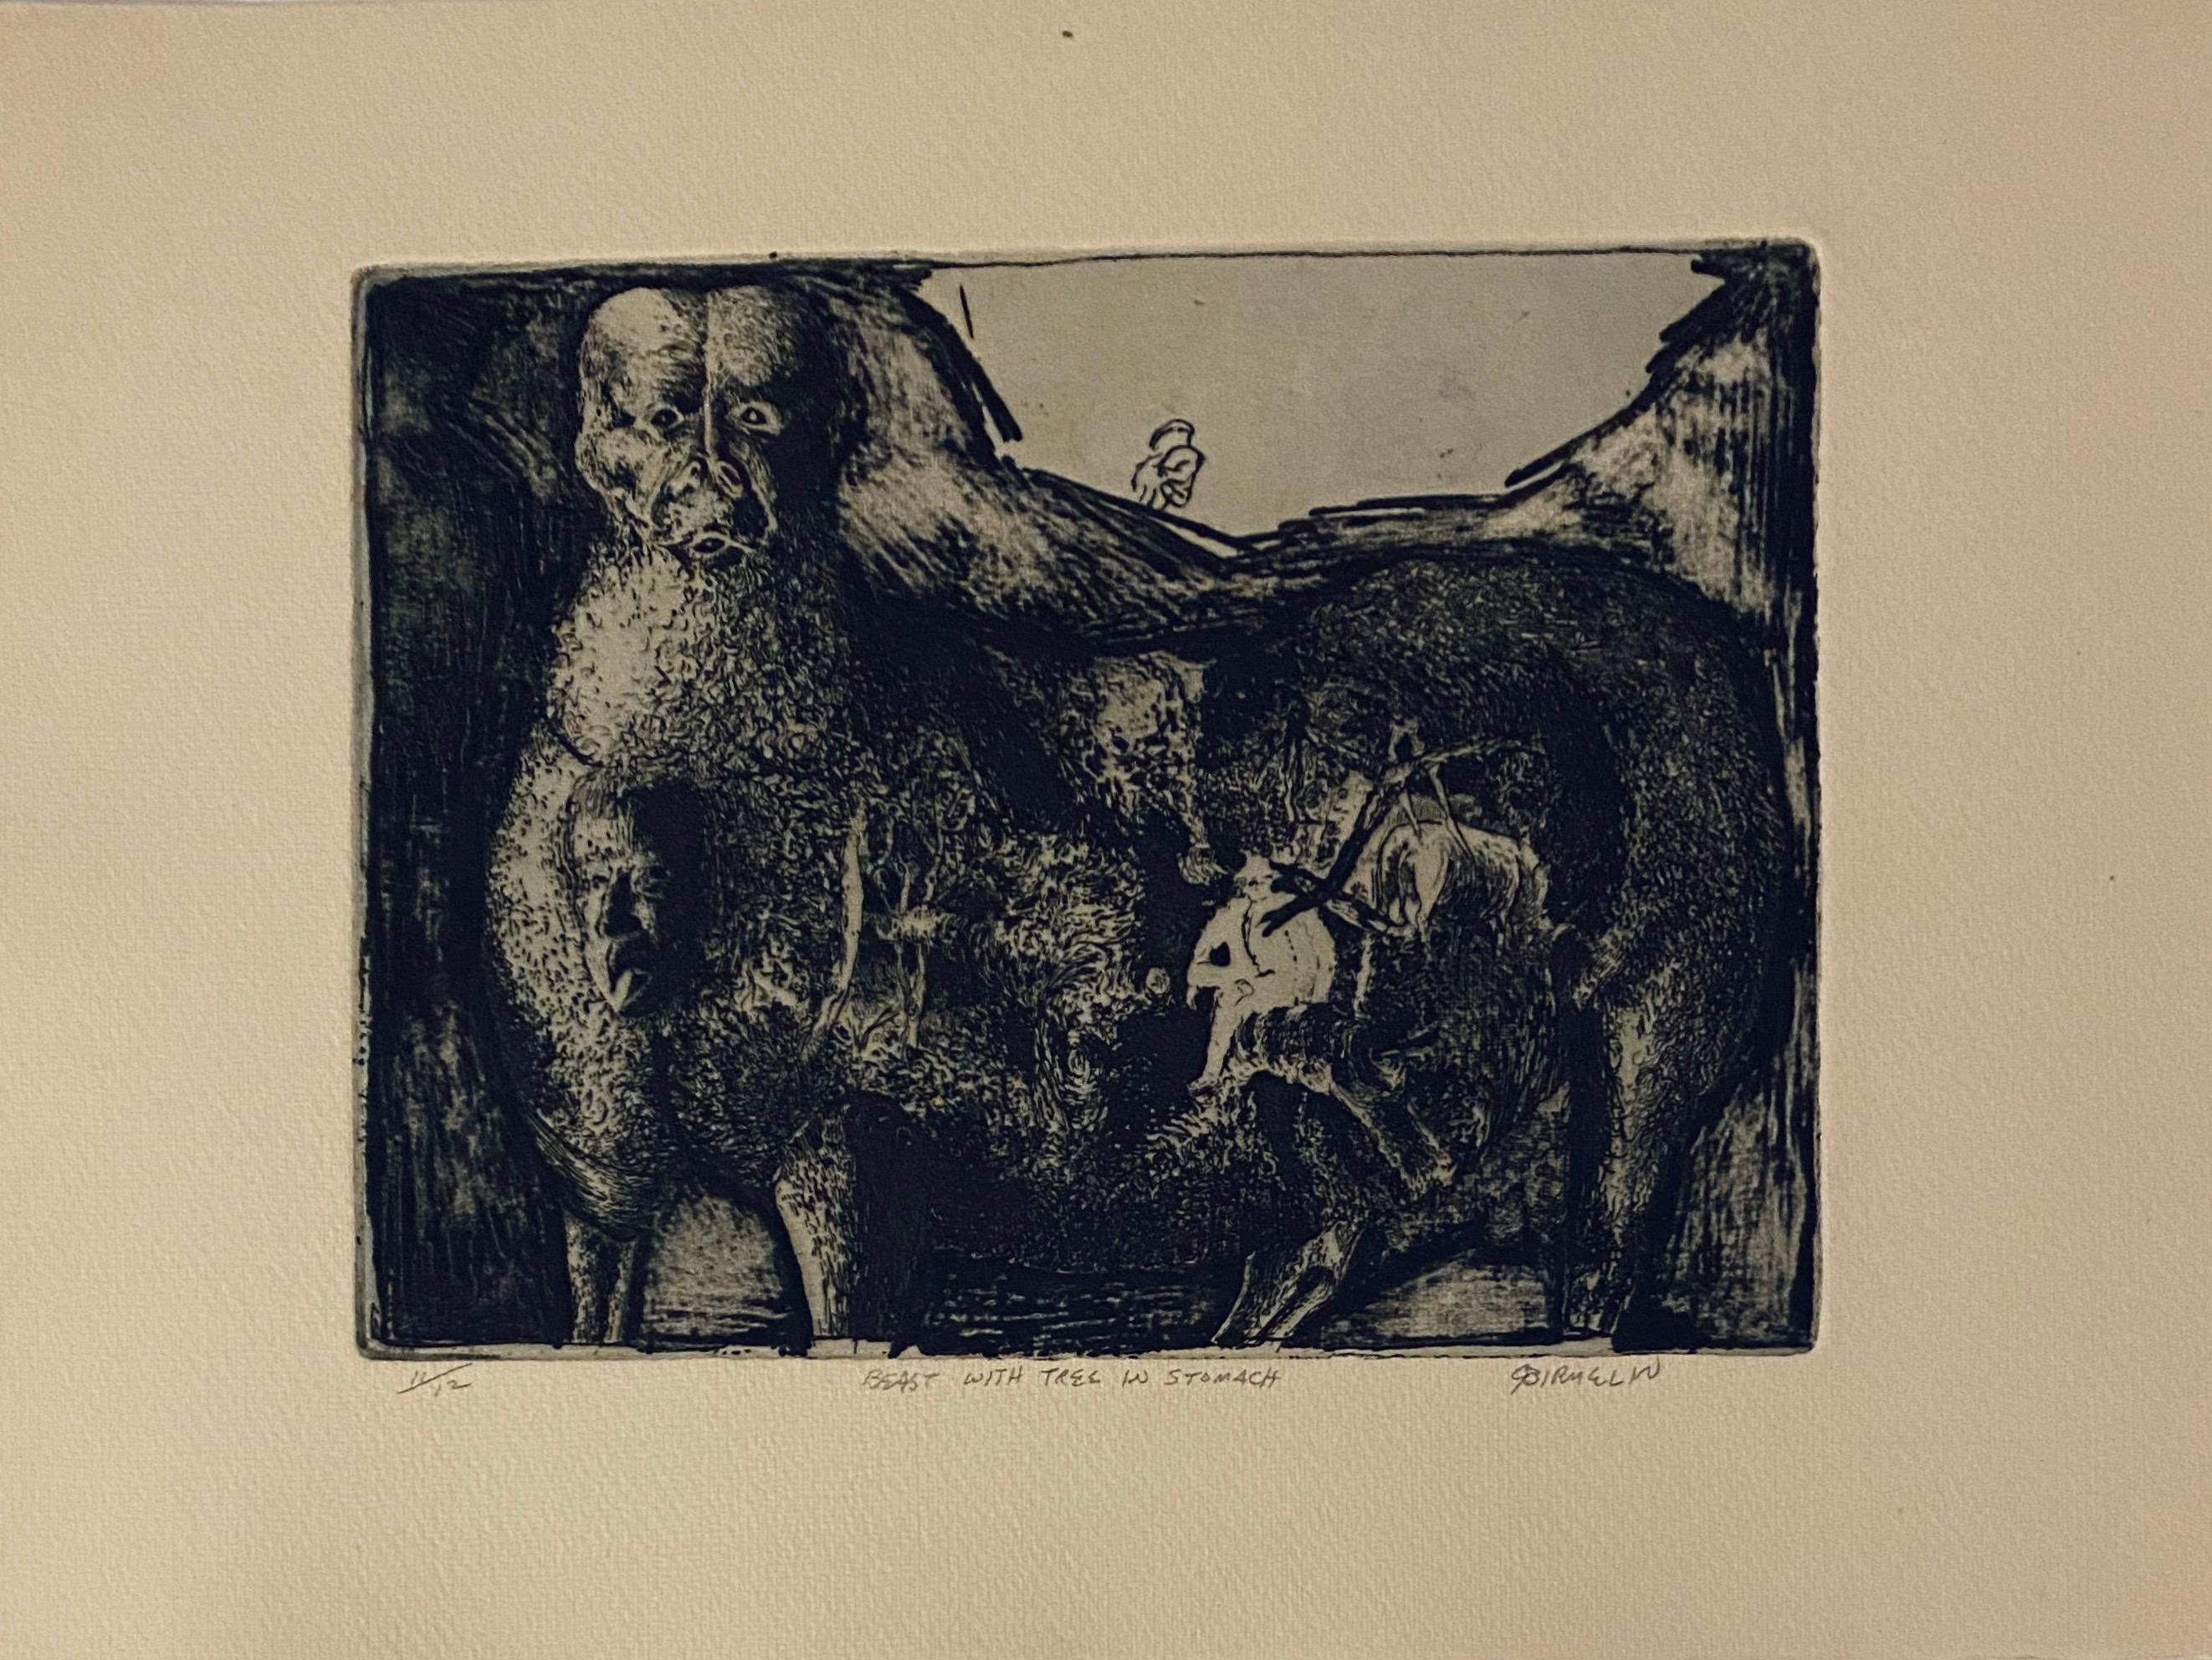 Beast With Tree In Stomach, American Modernist Abstract Etching - Print by Robert A. Birmelin